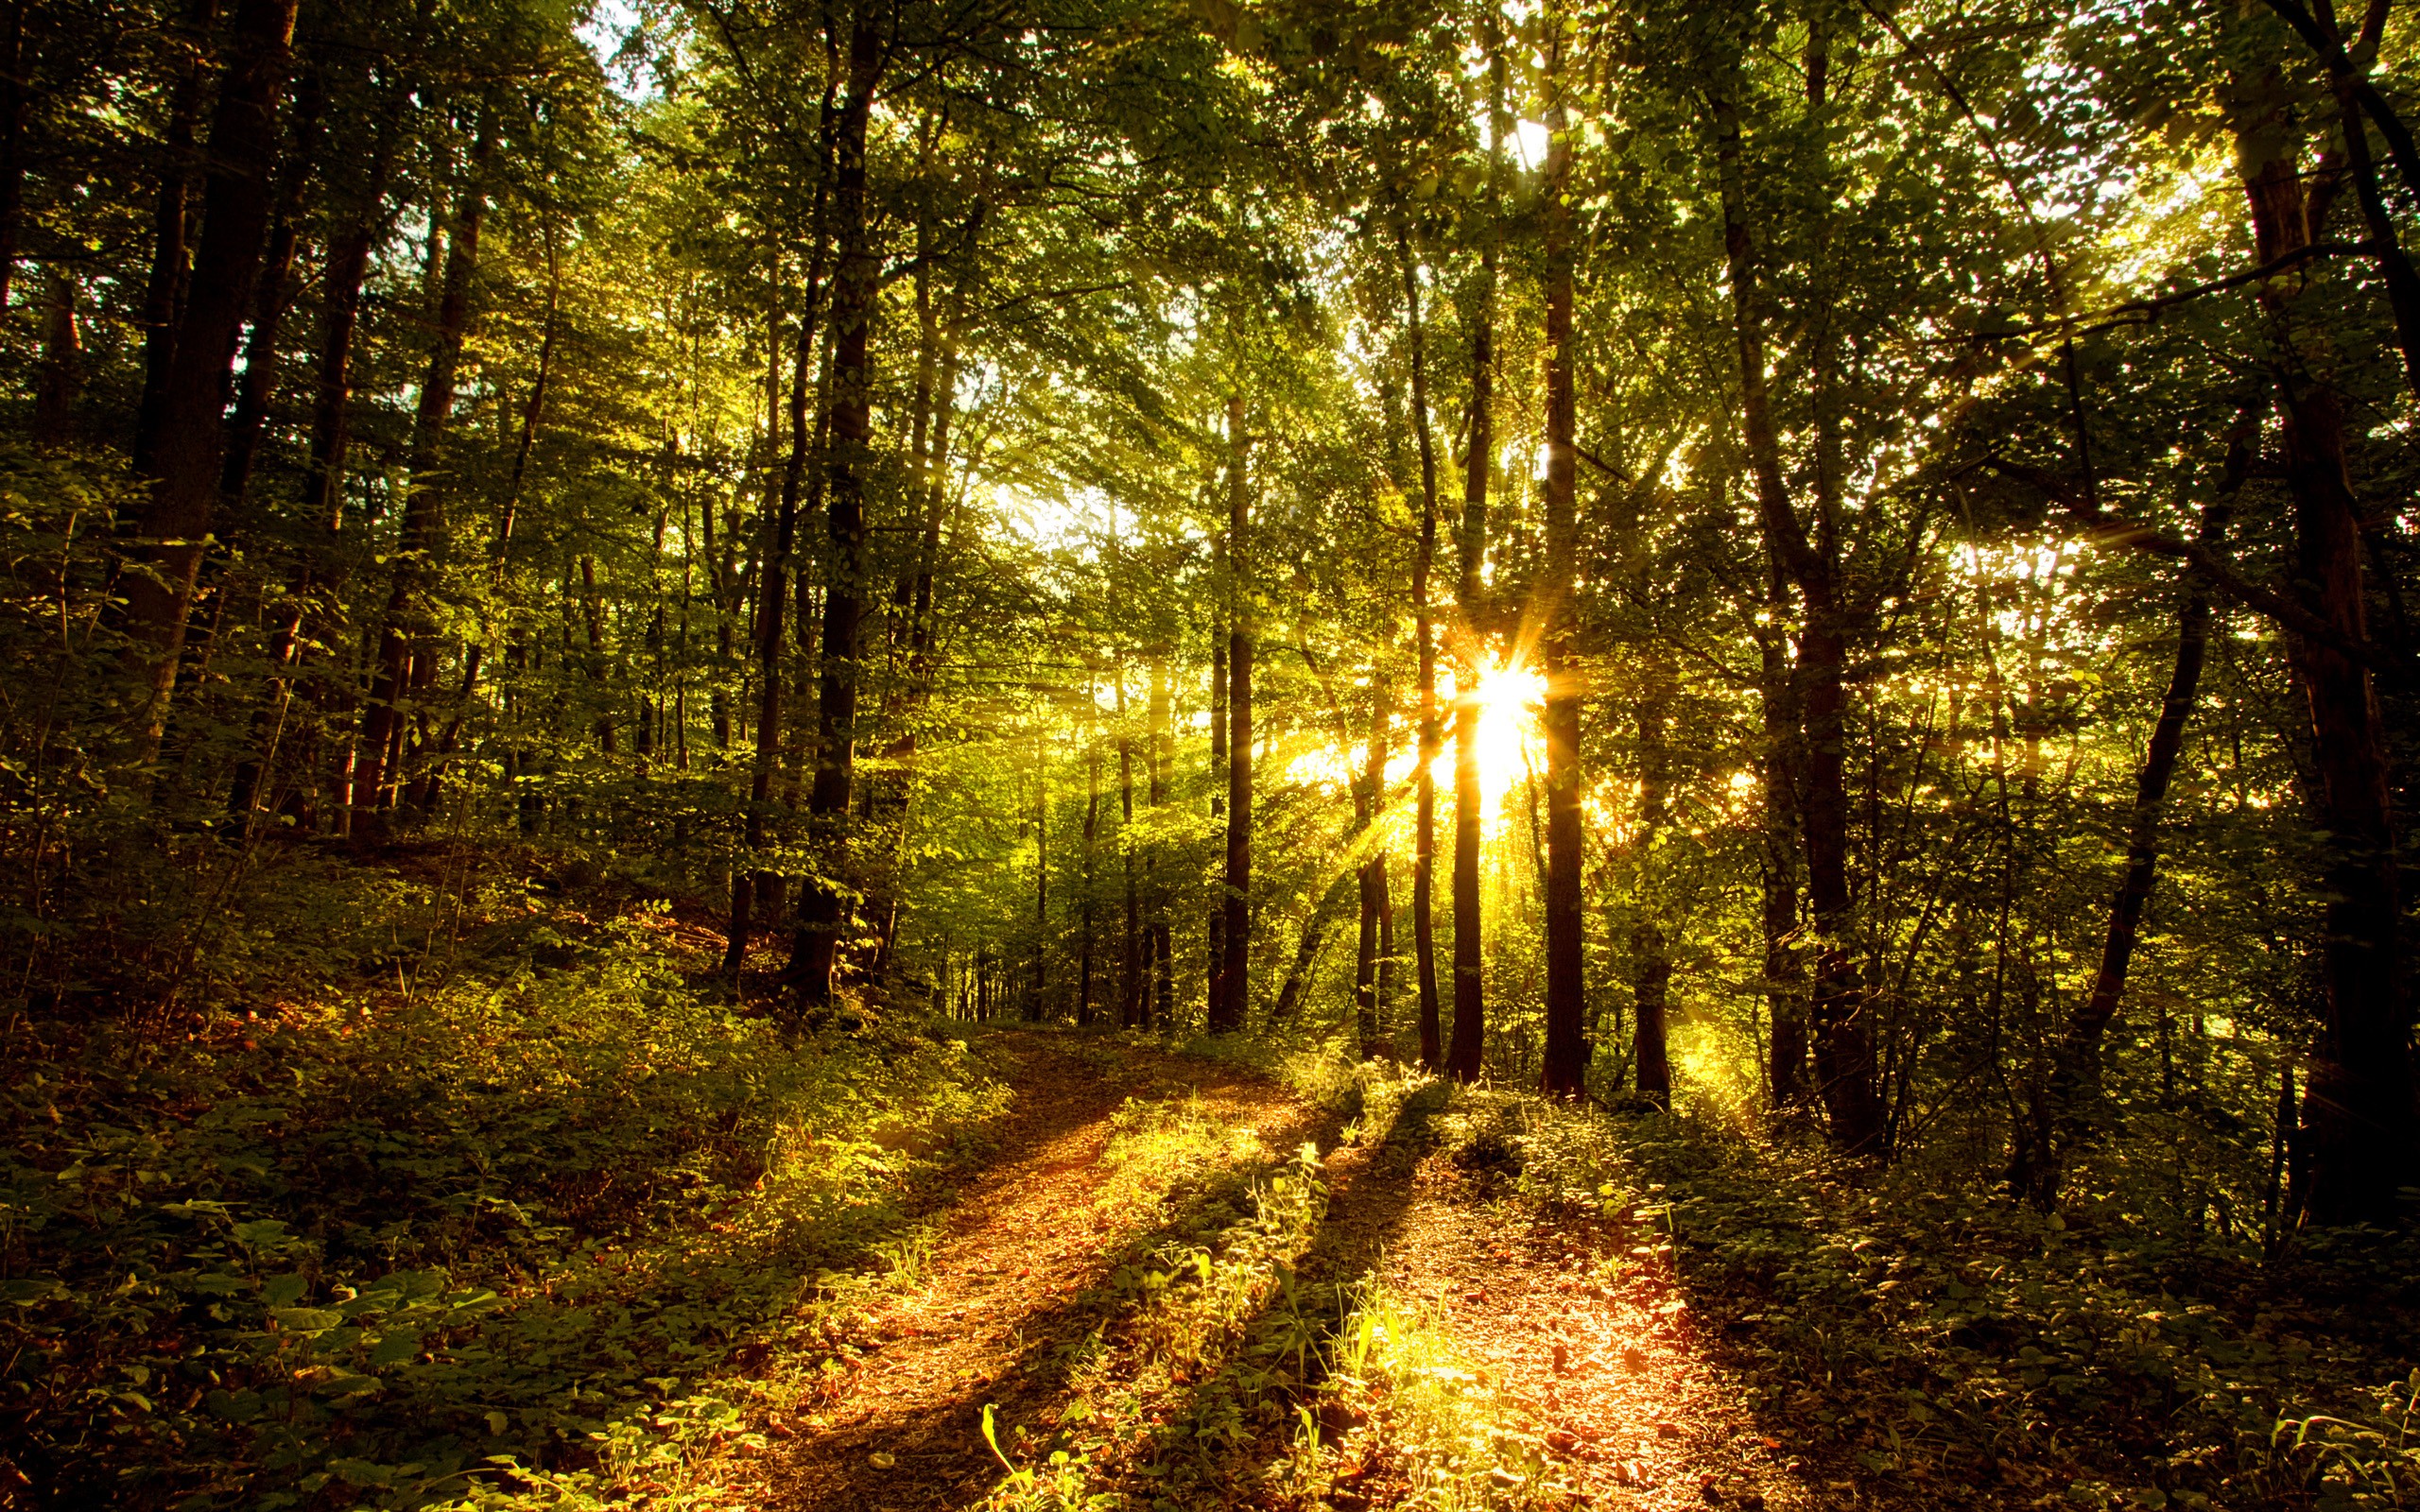 General 2560x1600 nature landscape sunlight forest path sun rays trees plants